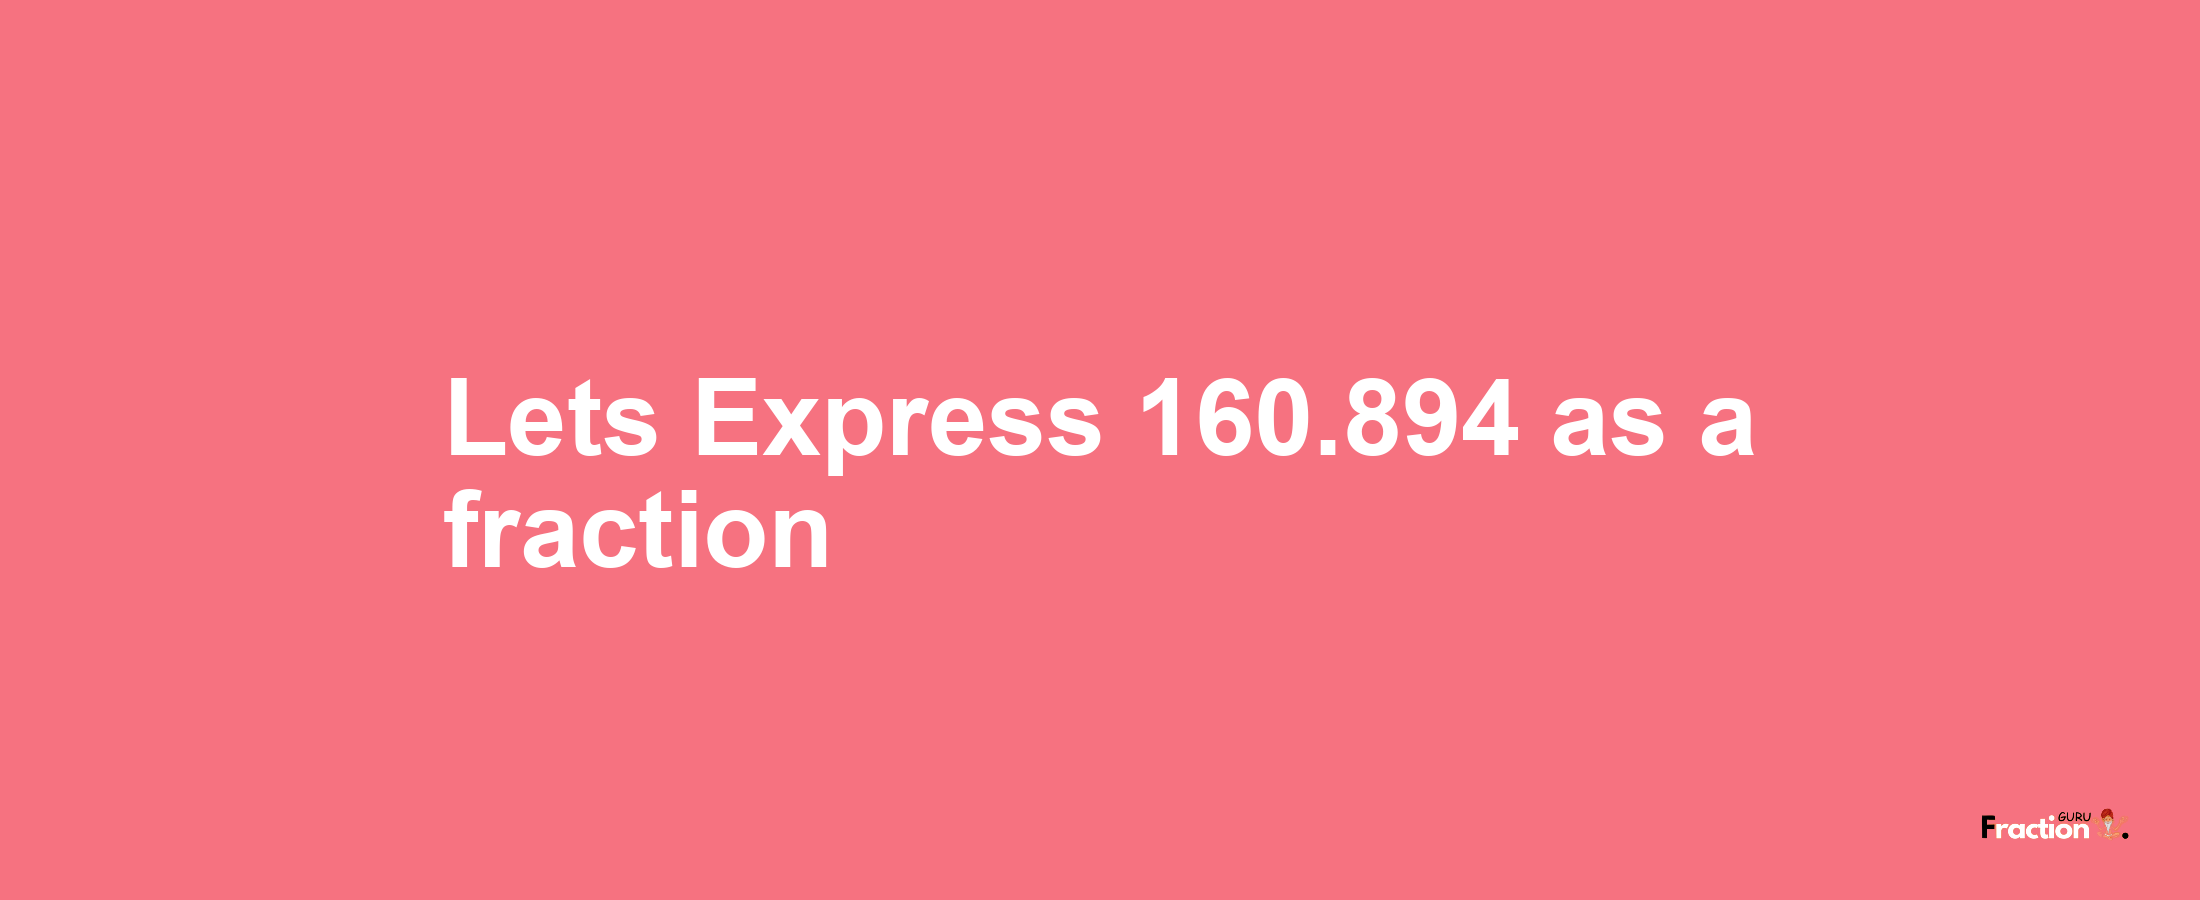 Lets Express 160.894 as afraction